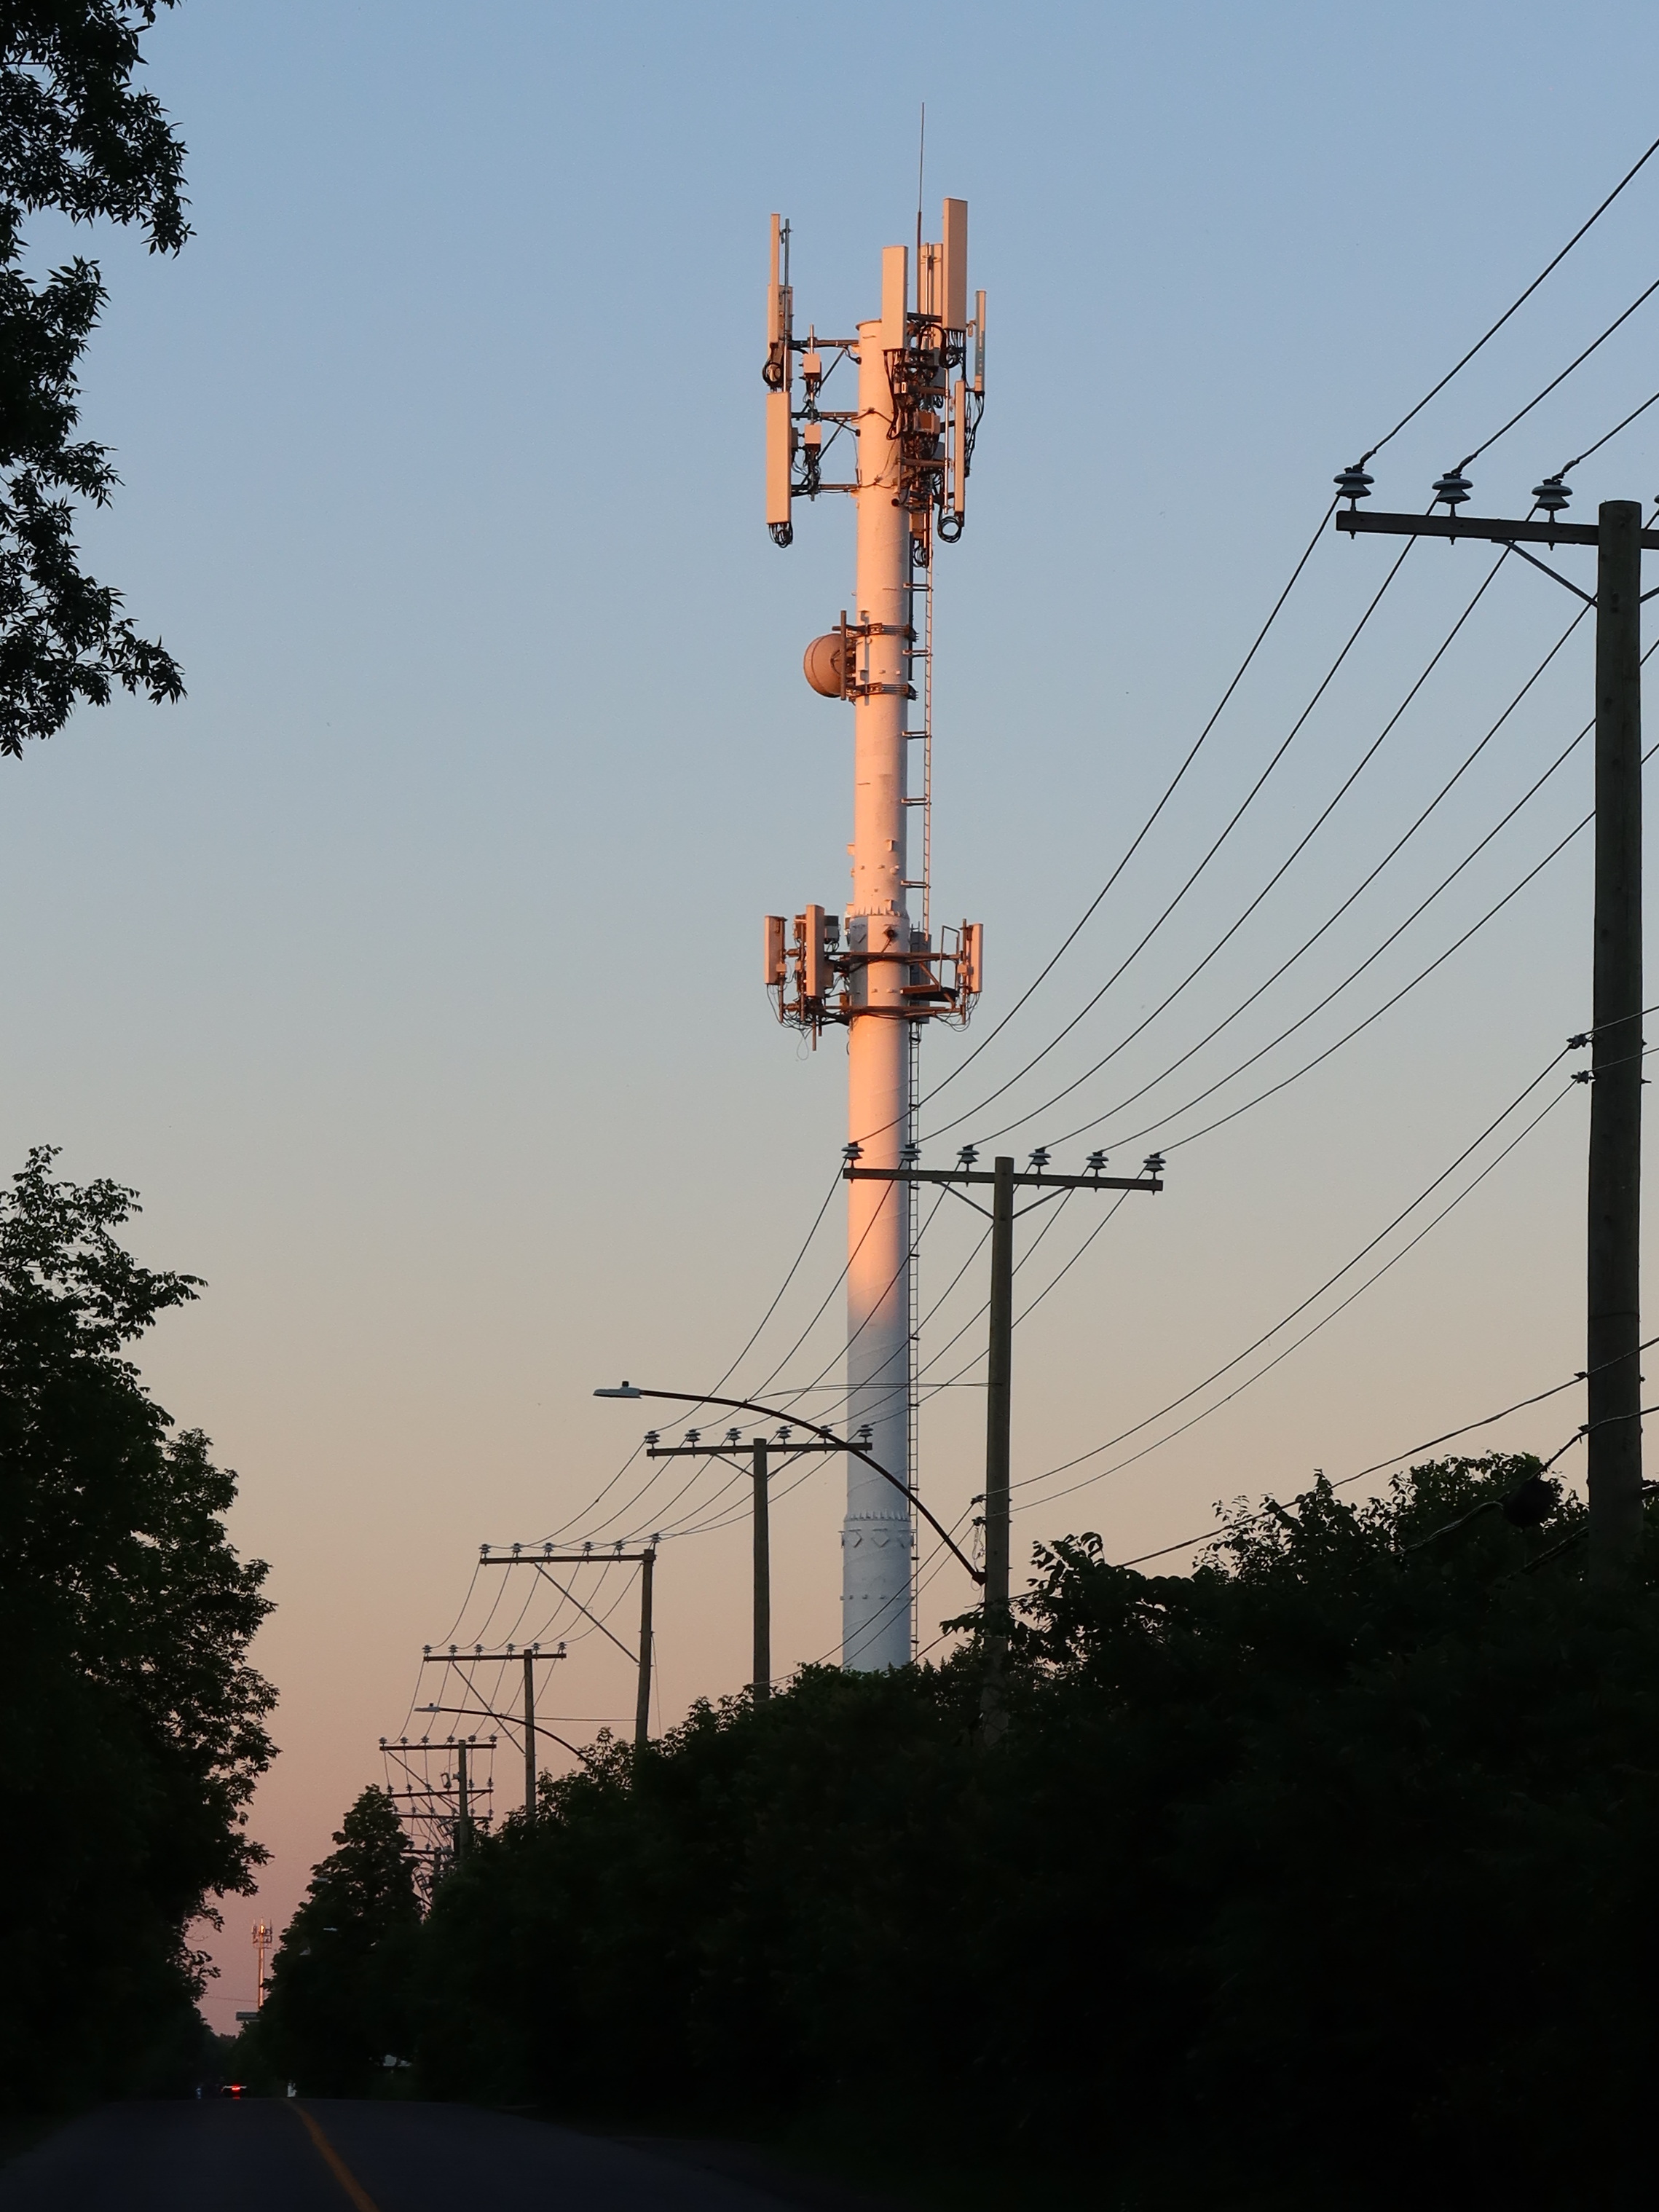 2021-06-19_2028-596-power-lines-cell-tower_th.jpg